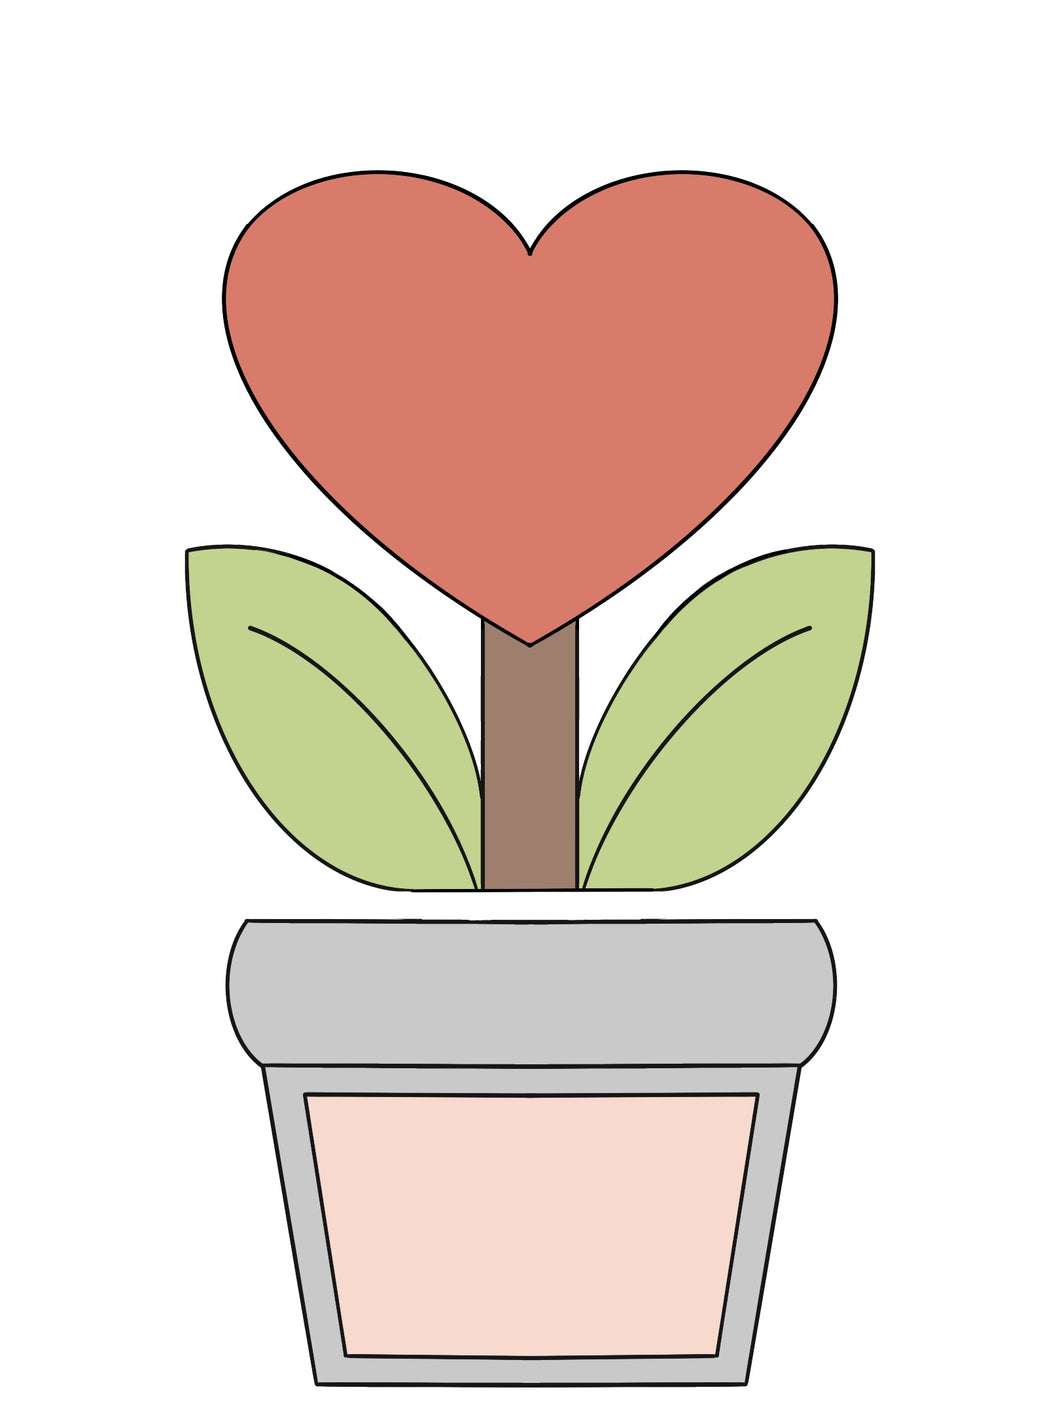 2 pc Potted Heart Flower